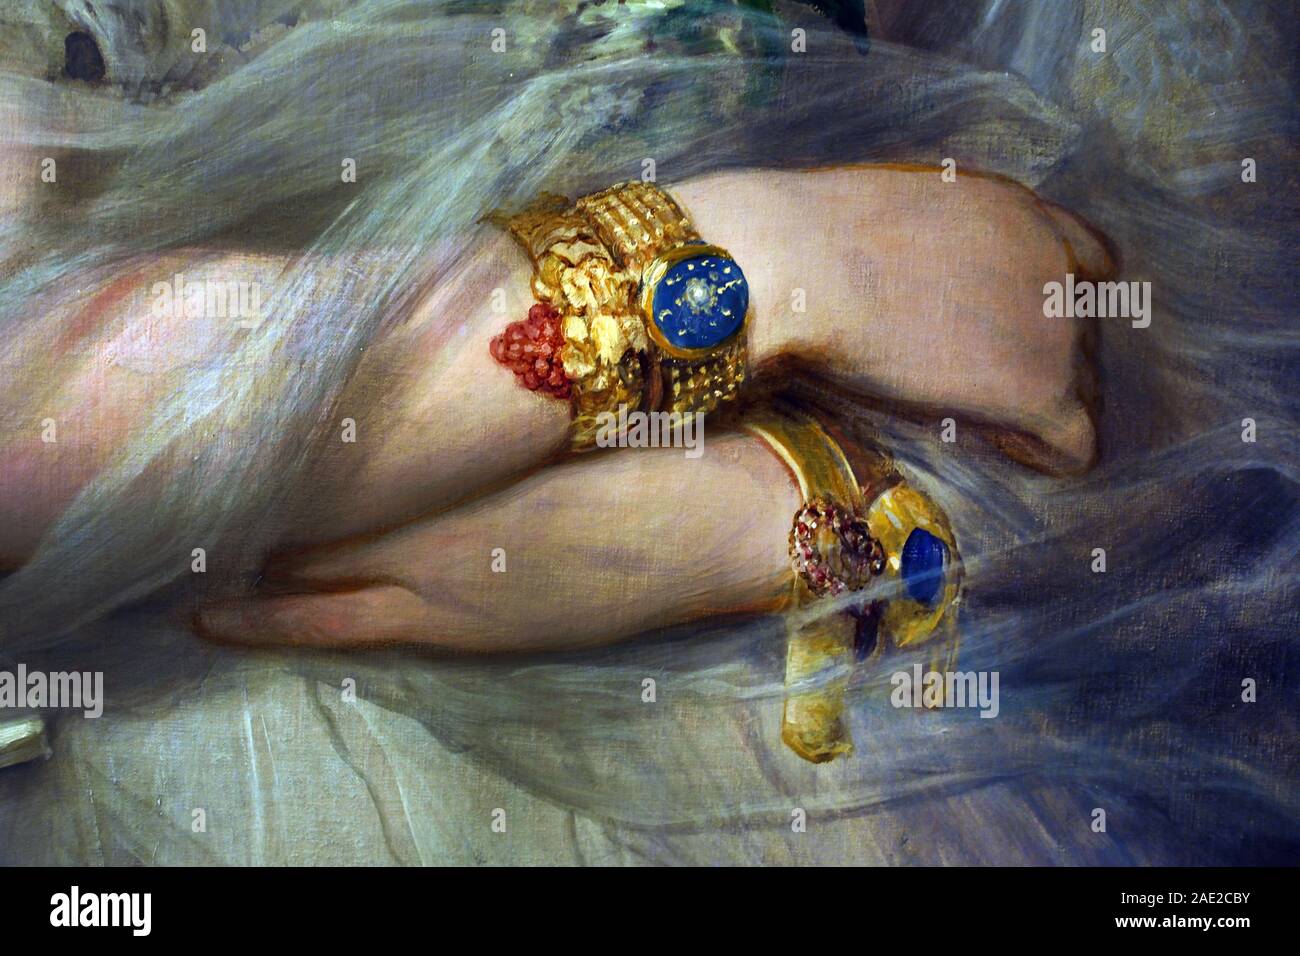 Unidentified Bride 1858-59, Jewels of Russian imperial court, 18th-19th Century, Russia. Stock Photo